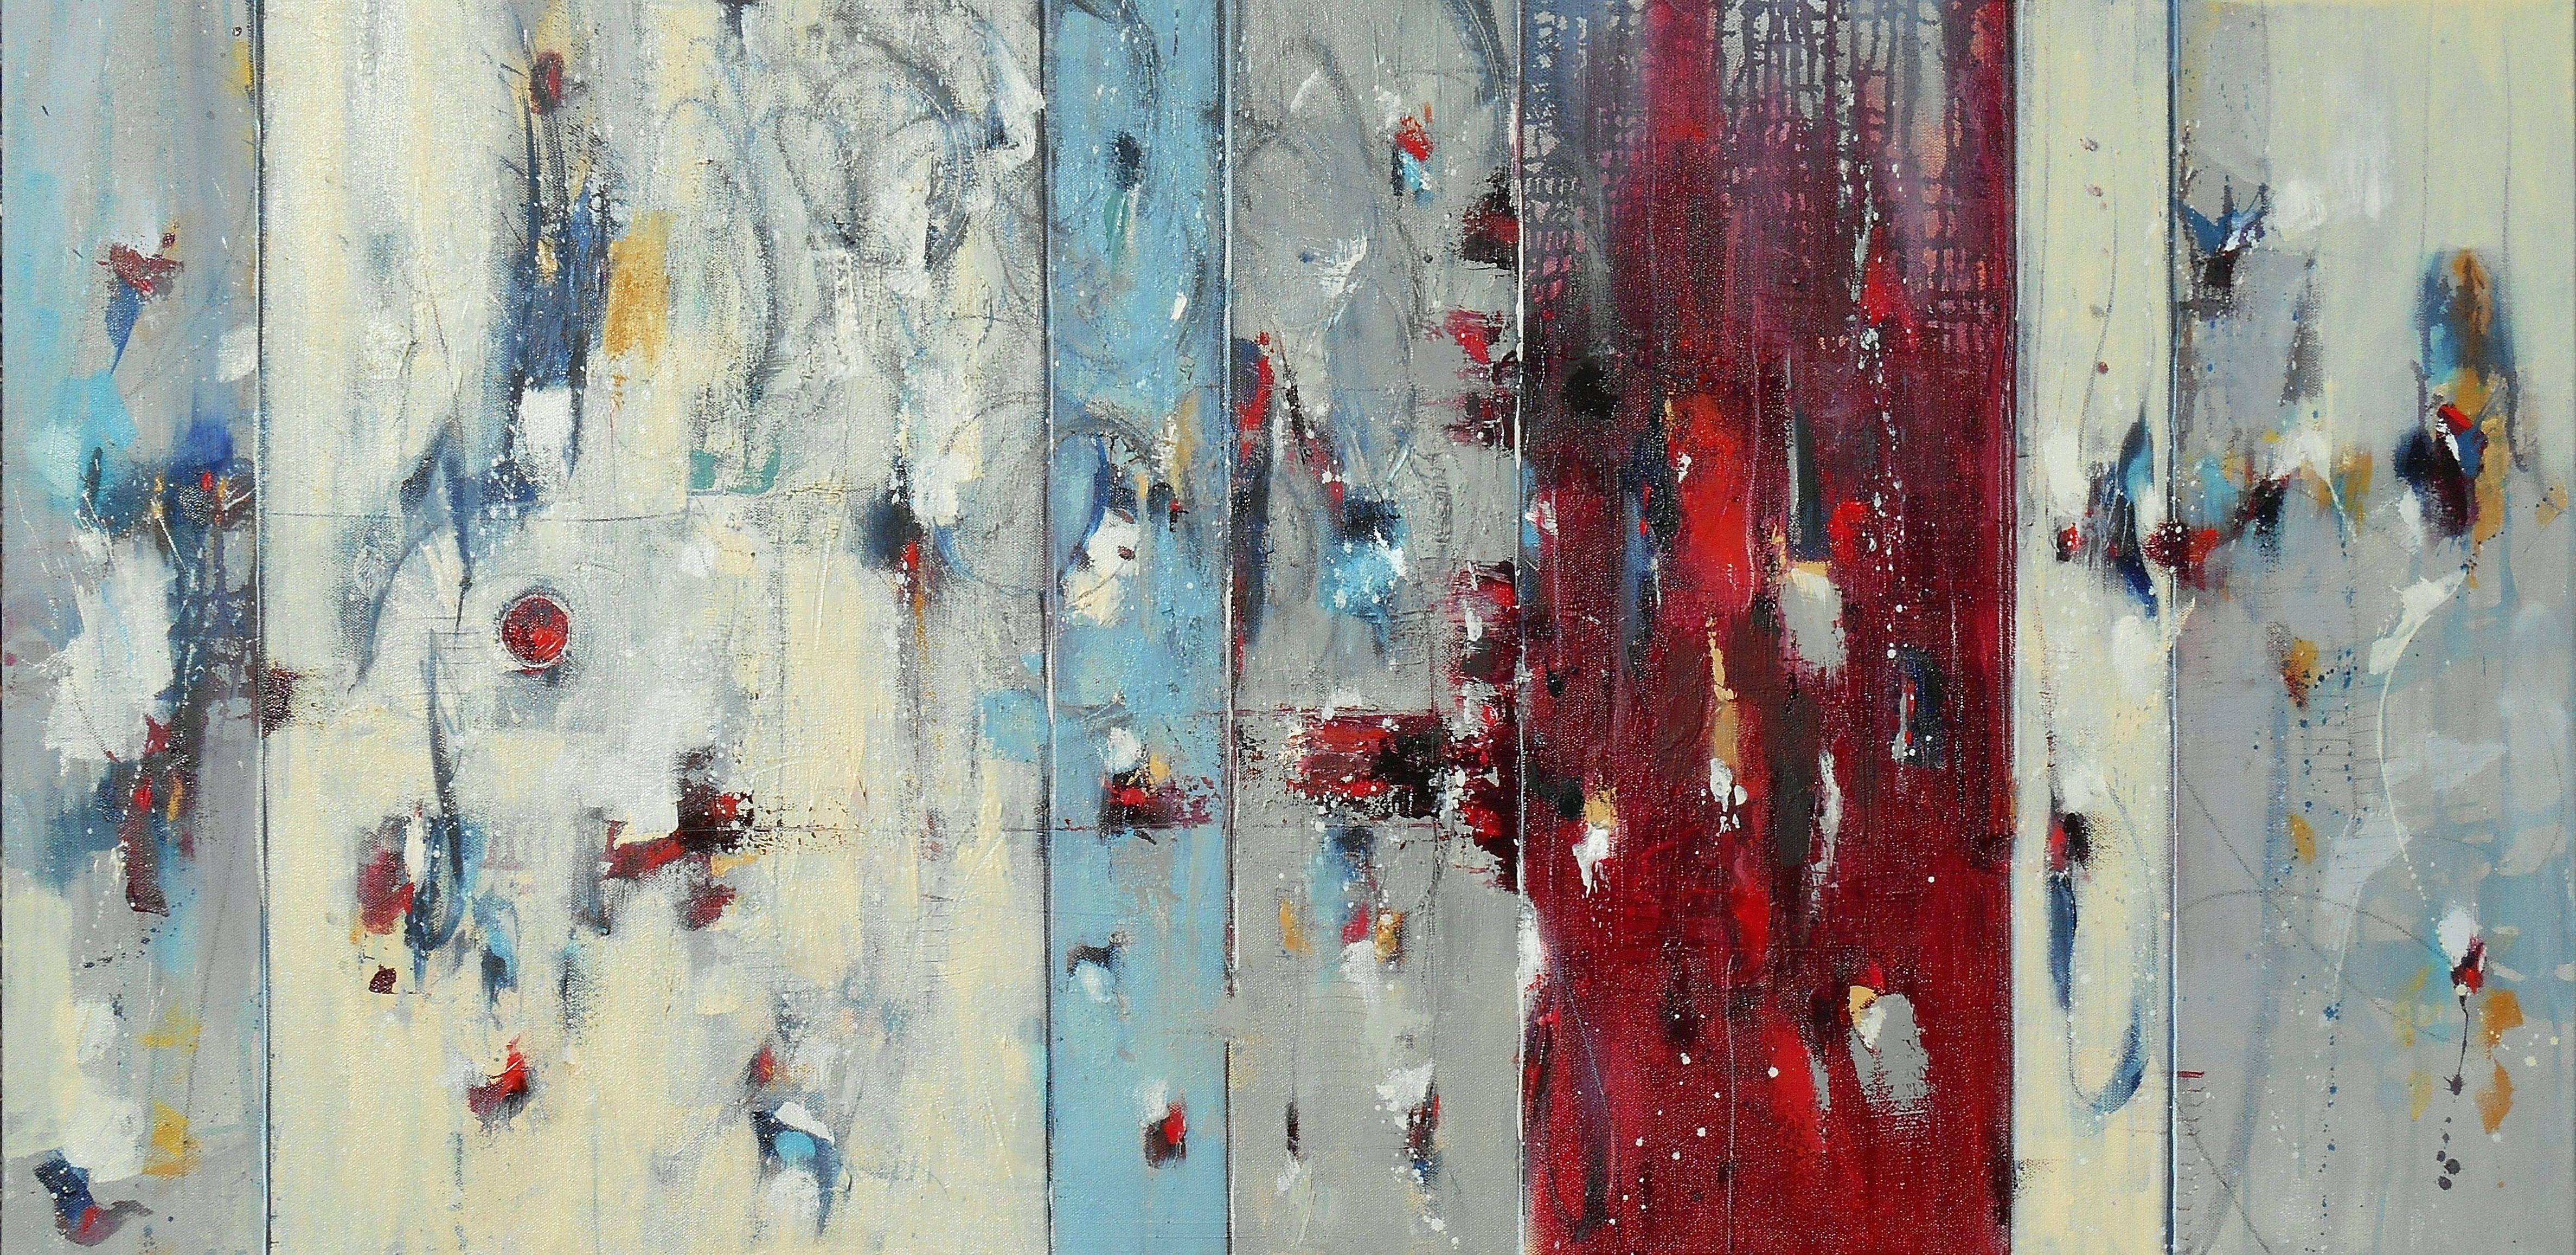 Cynthia  Ligeros Abstract Painting - There Is Another Sky, Painting, Oil on Canvas